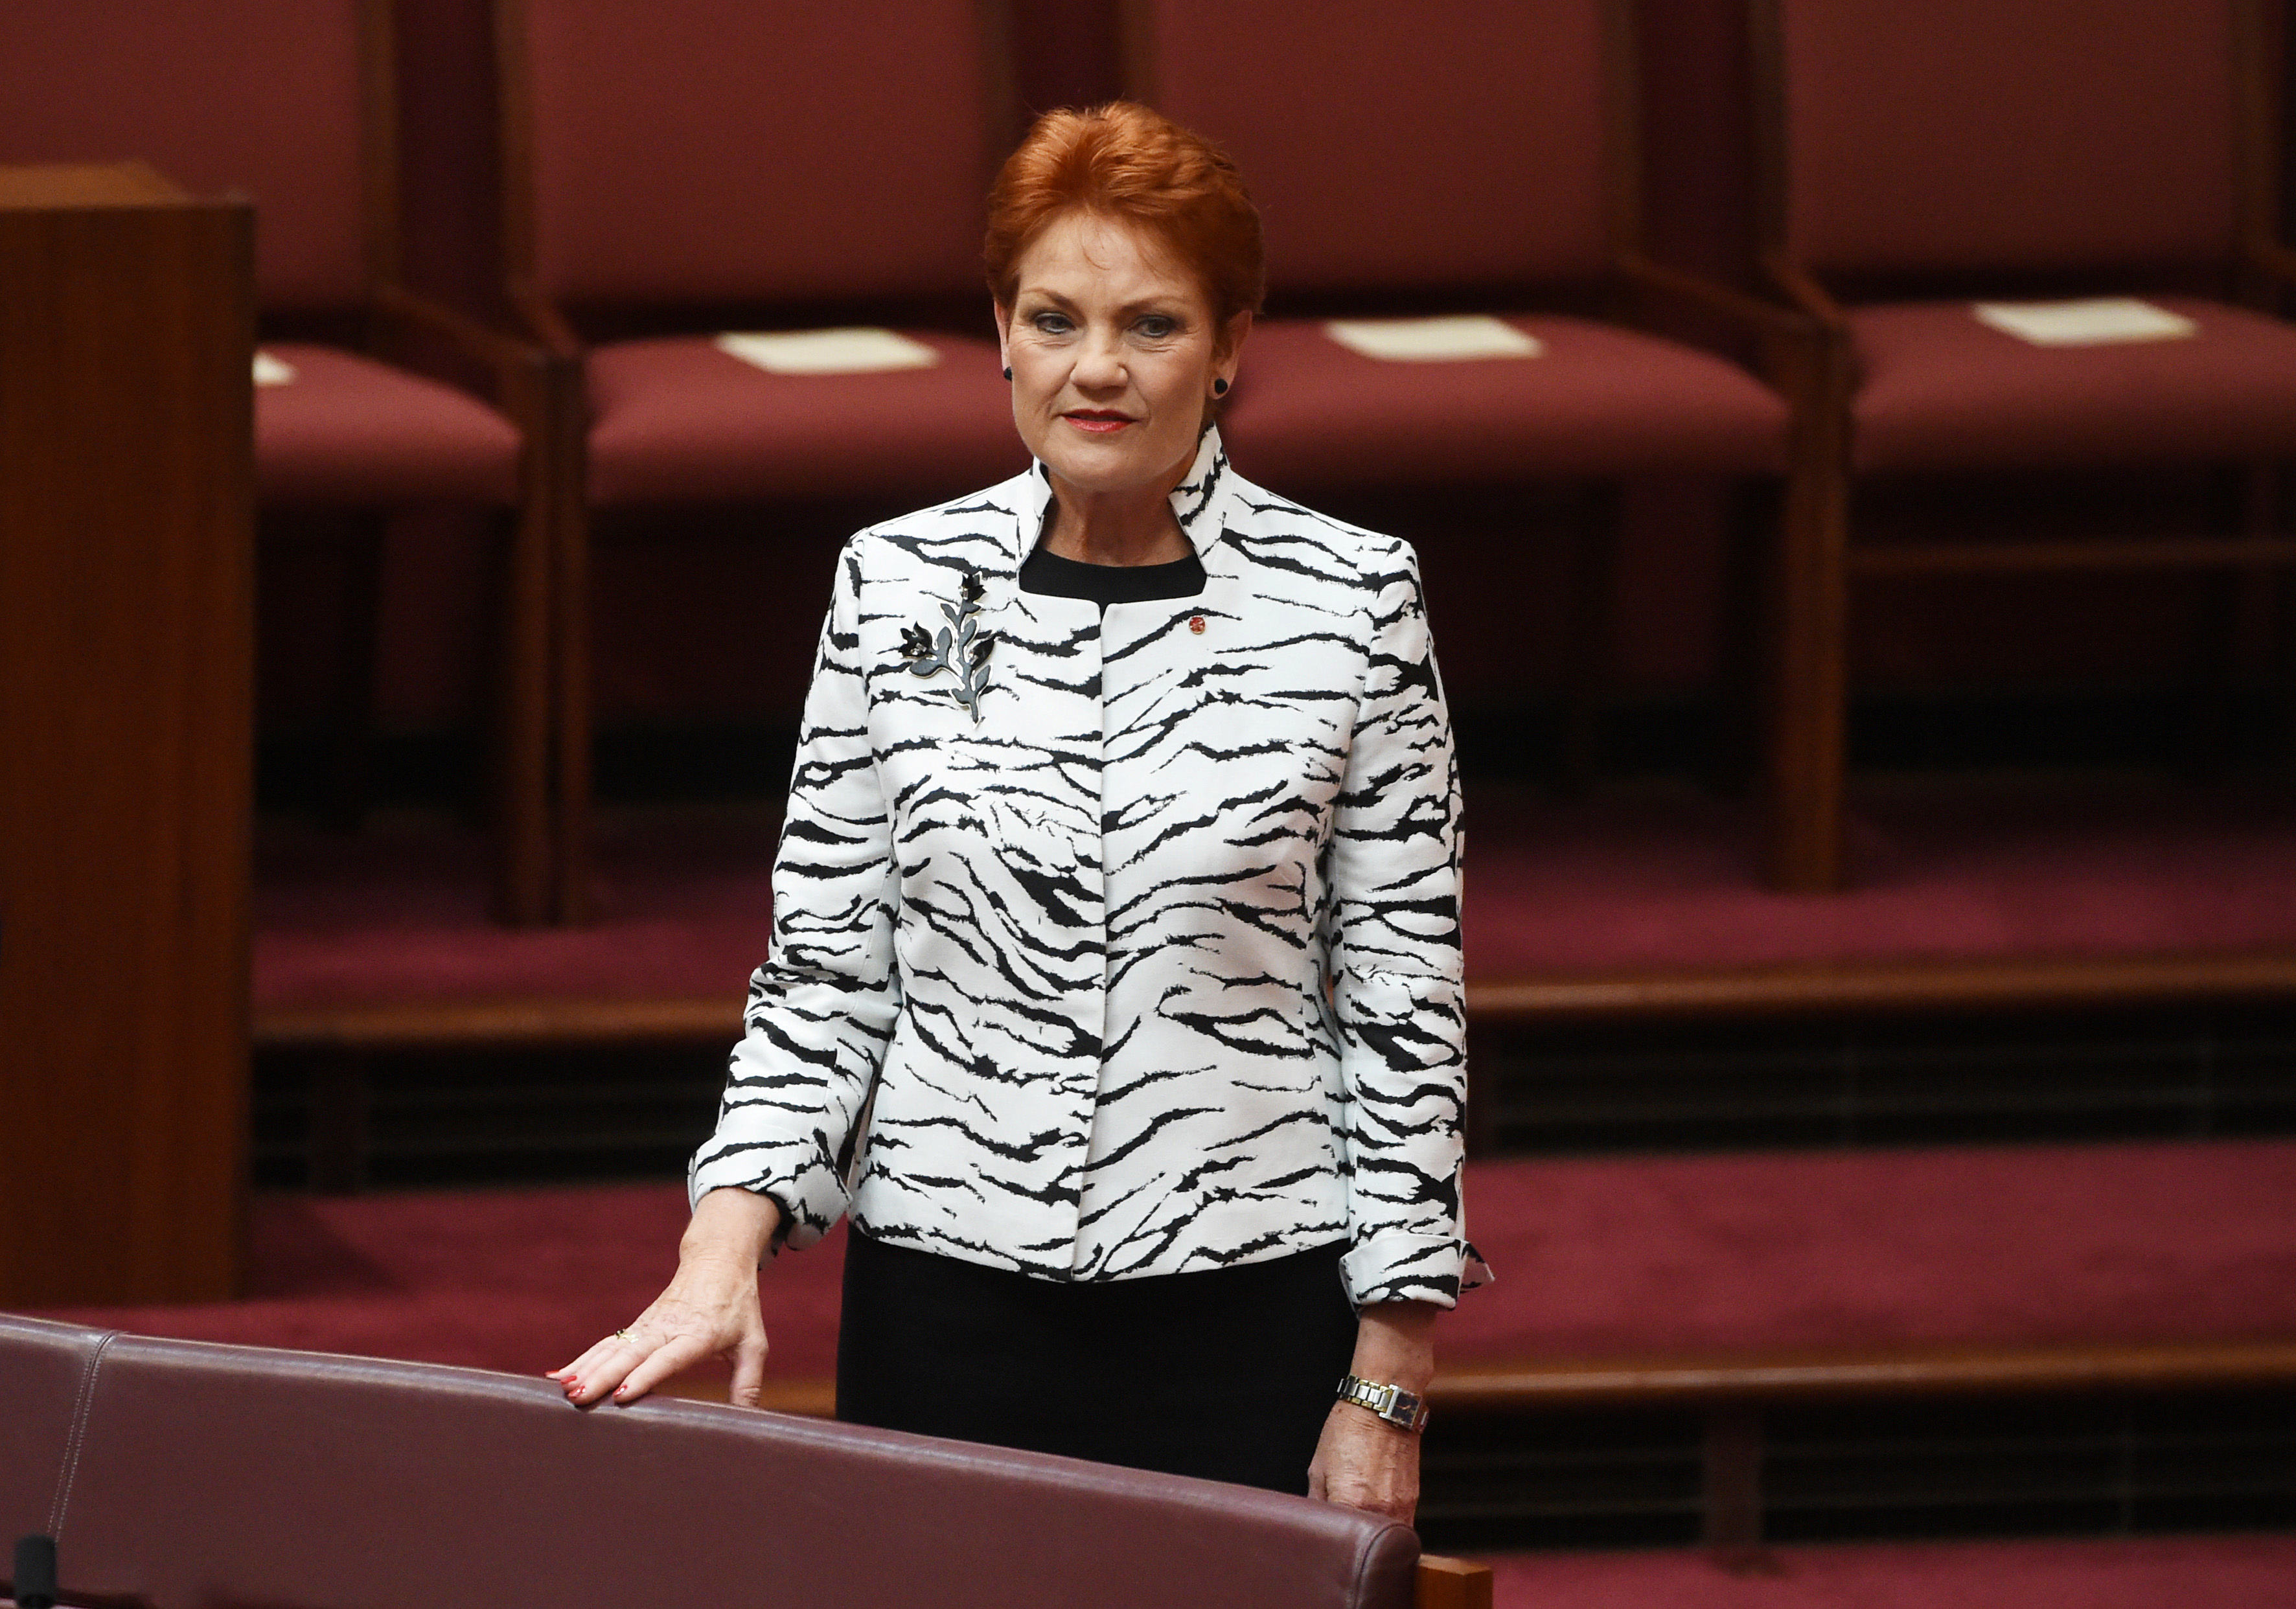 Australian One Nation party Senator Pauline Hanson is pictured in the Senate chamber on the opening day of the new parliamentary session at Parliament House in Canberra